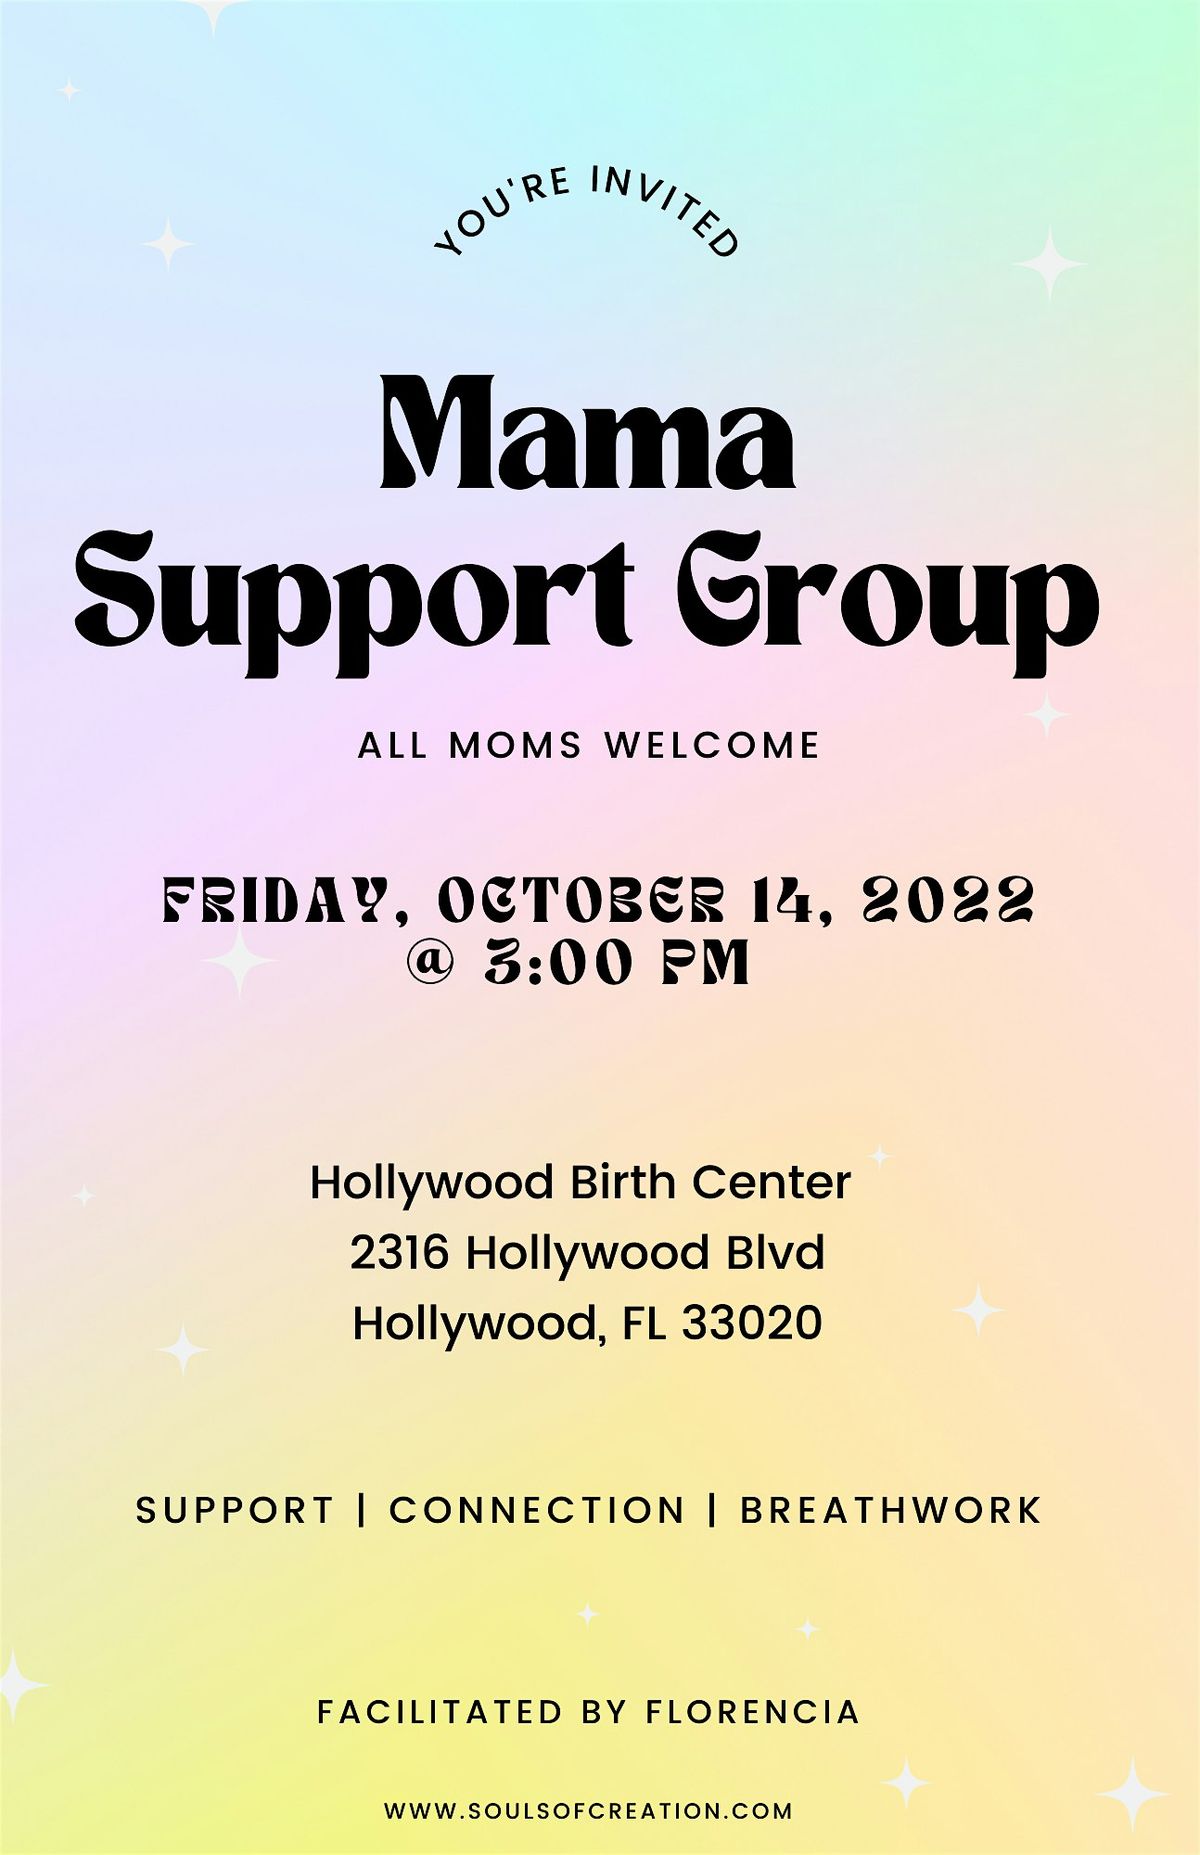 Mama Support Group